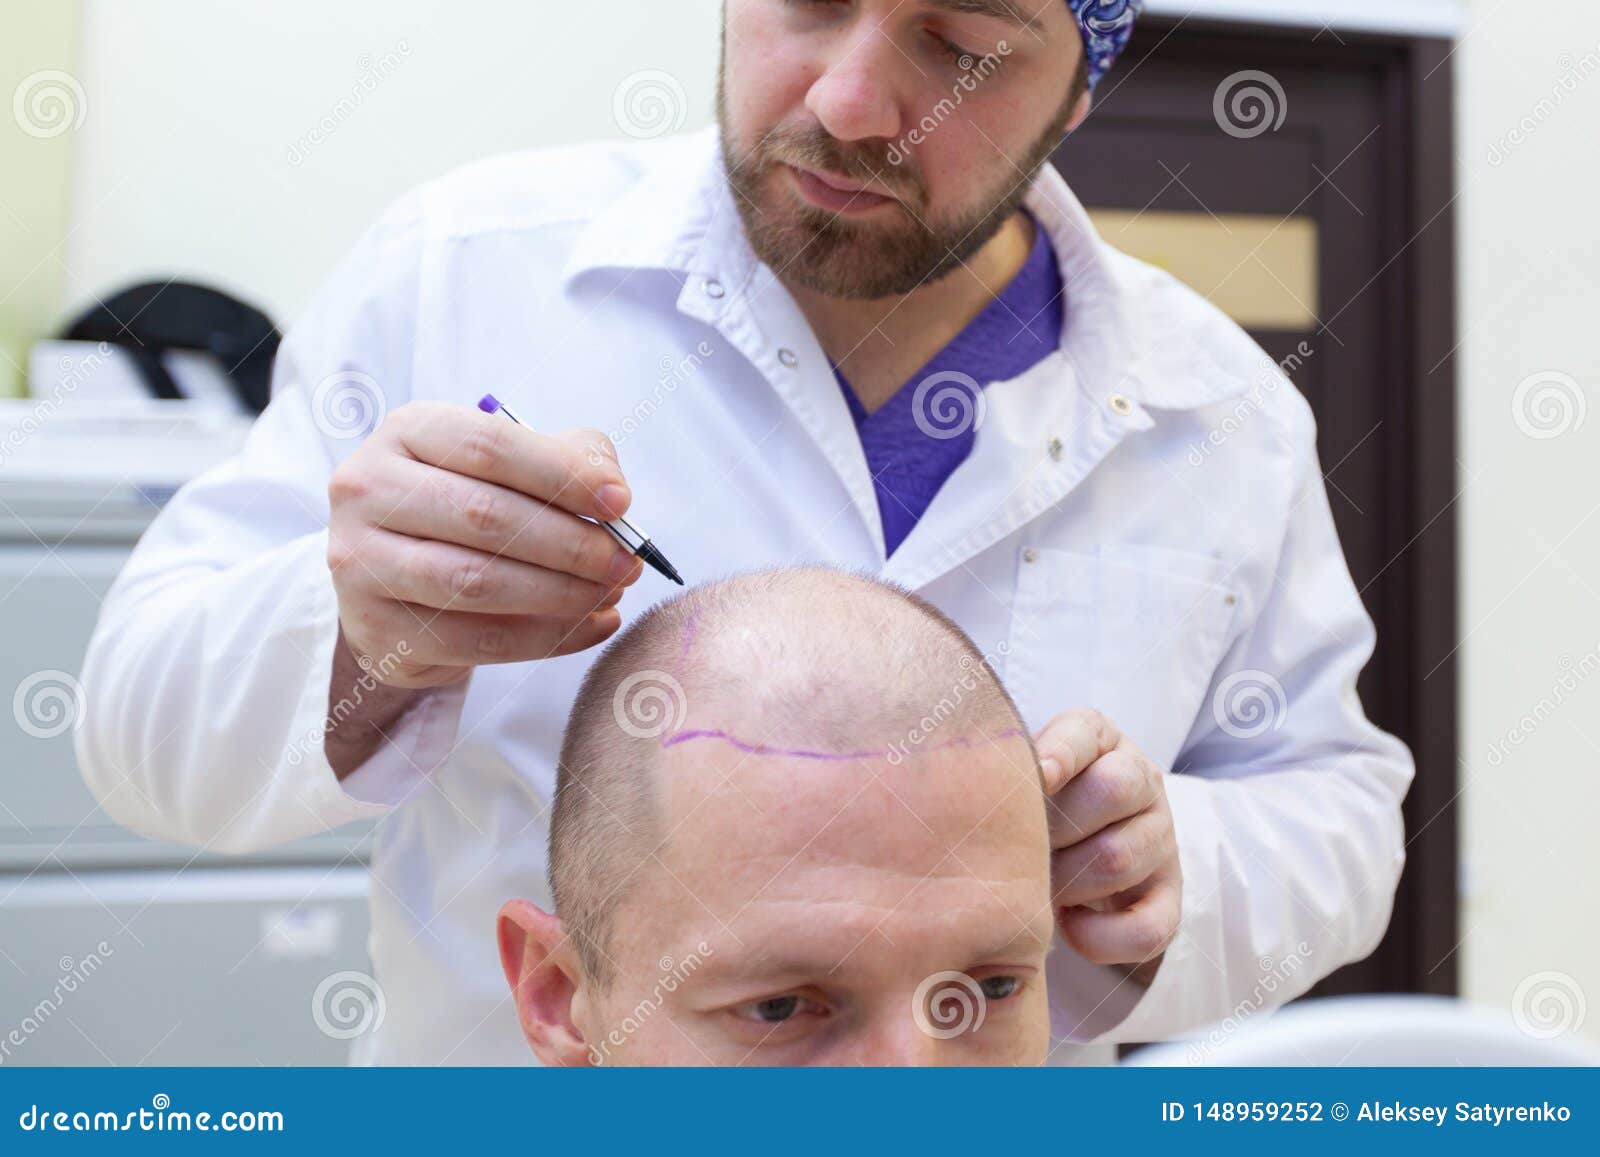 6900 Hair Loss Doctor Stock Photos Pictures  RoyaltyFree Images   iStock  Doctor consultation